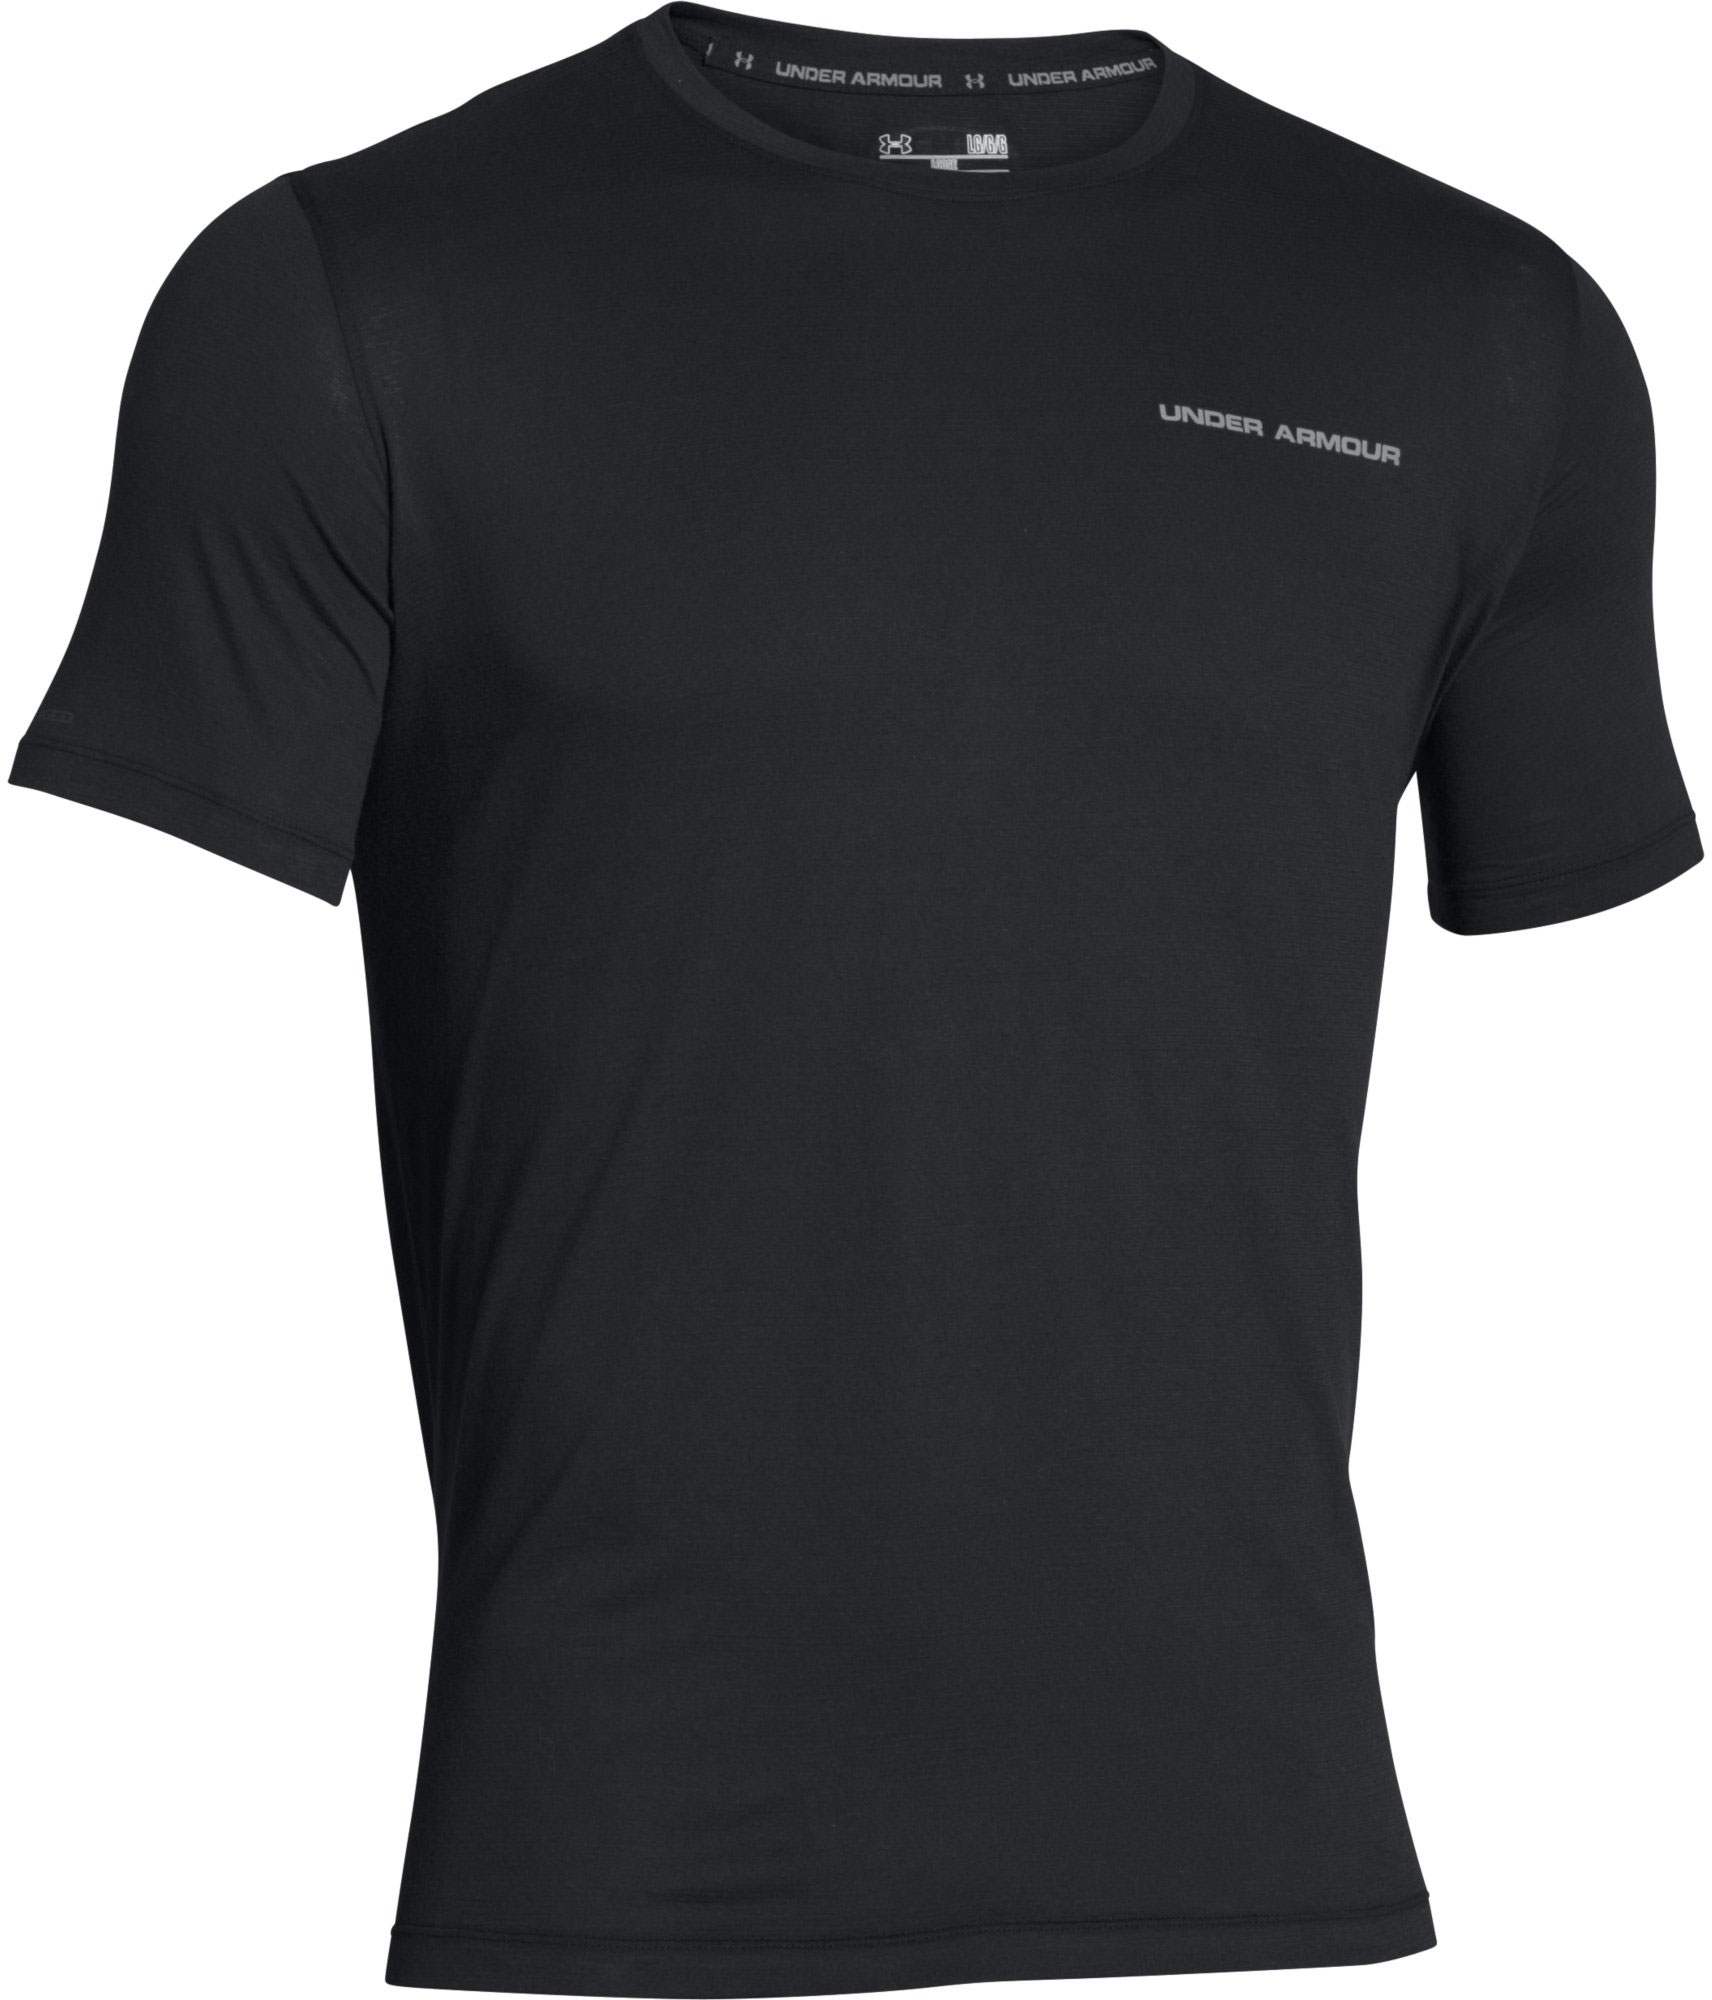 Under Armour Mens Charged Cotton T-Shirt